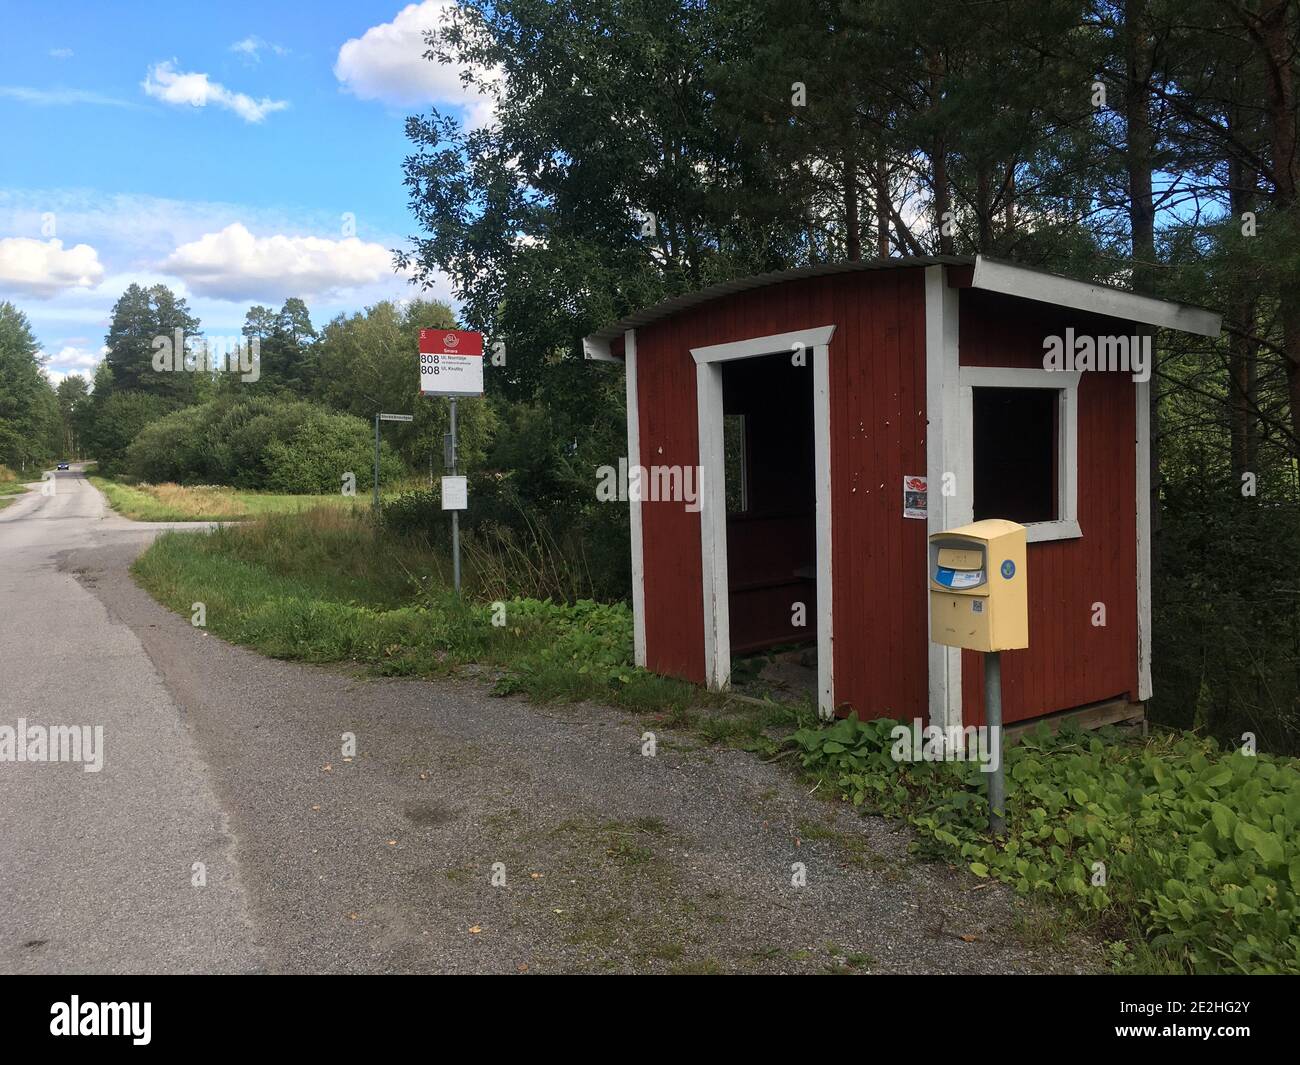 Stockholm, Sweden - August 26, 2020: A bus stop in the depopulated countryside of Sweden. With a post box beside it and a small red house to take cove Stock Photo